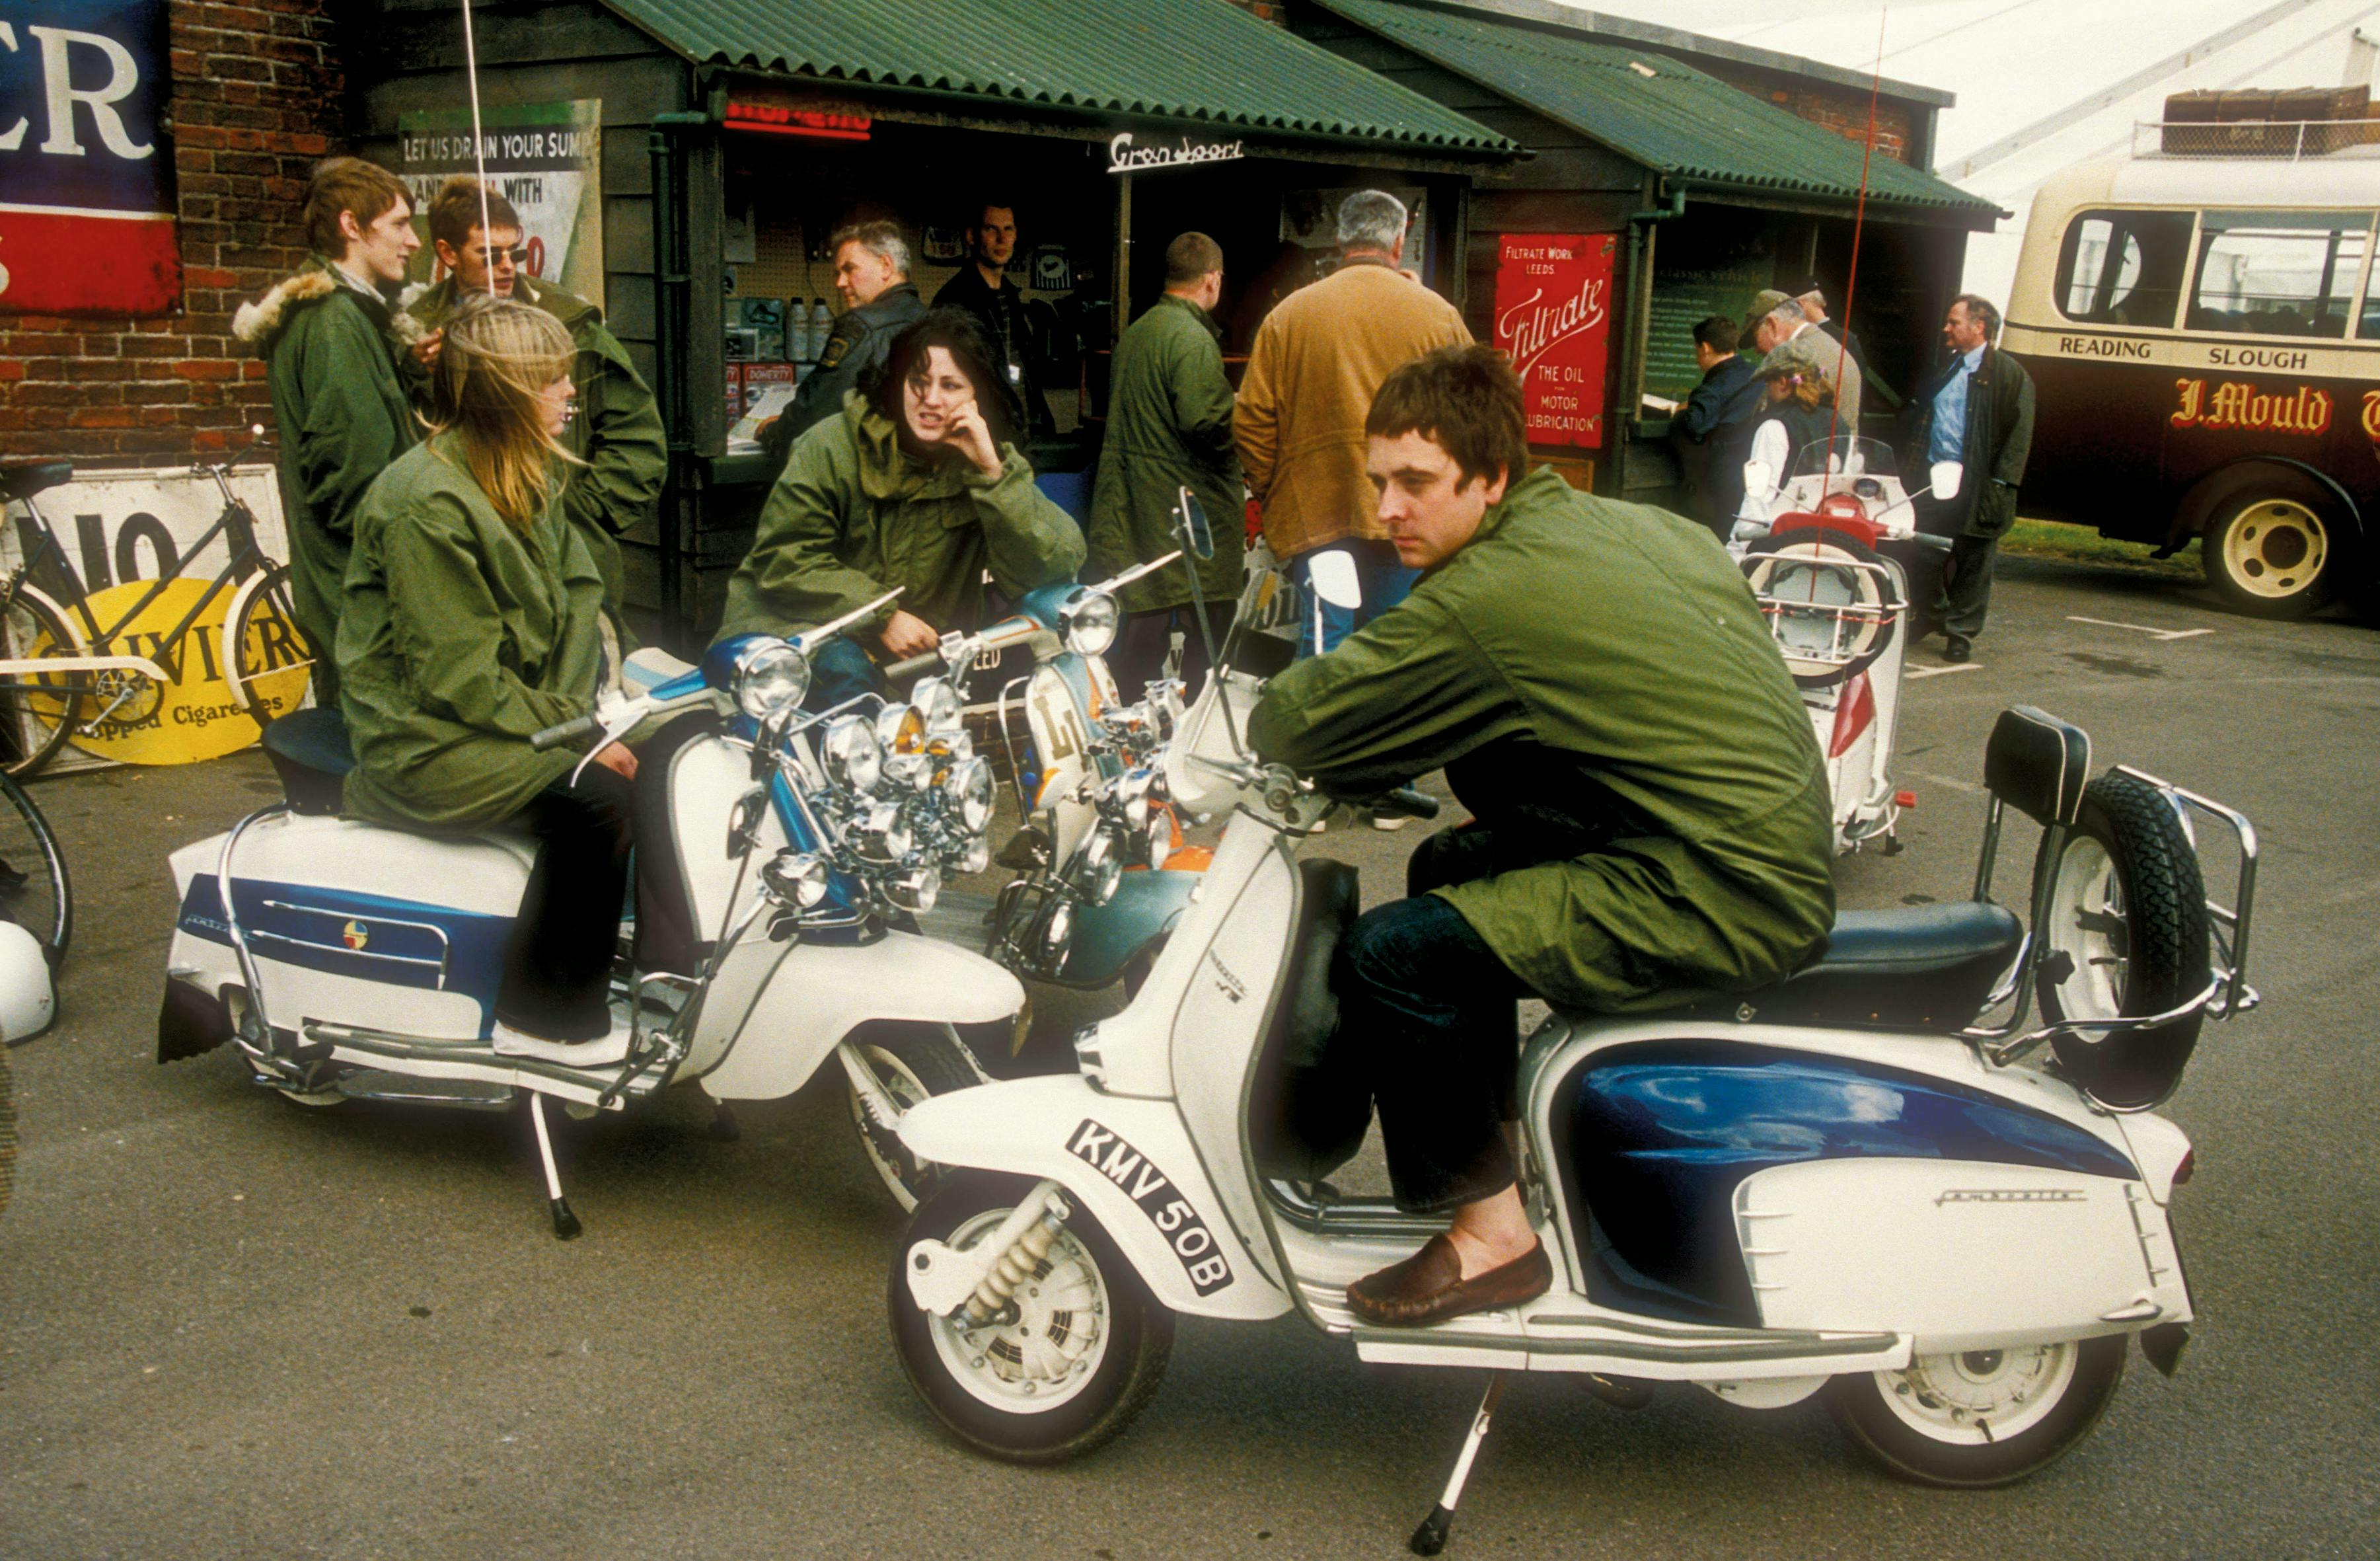 uk united kingdom great britain england 2000s adults white male female men women girls mods clothing parkas woman guys clothes 60s caucasian sixties scooters scooterists goodwood revival person wheel machine motorcycle vehicle transportation motor scooter bicycle bus moped